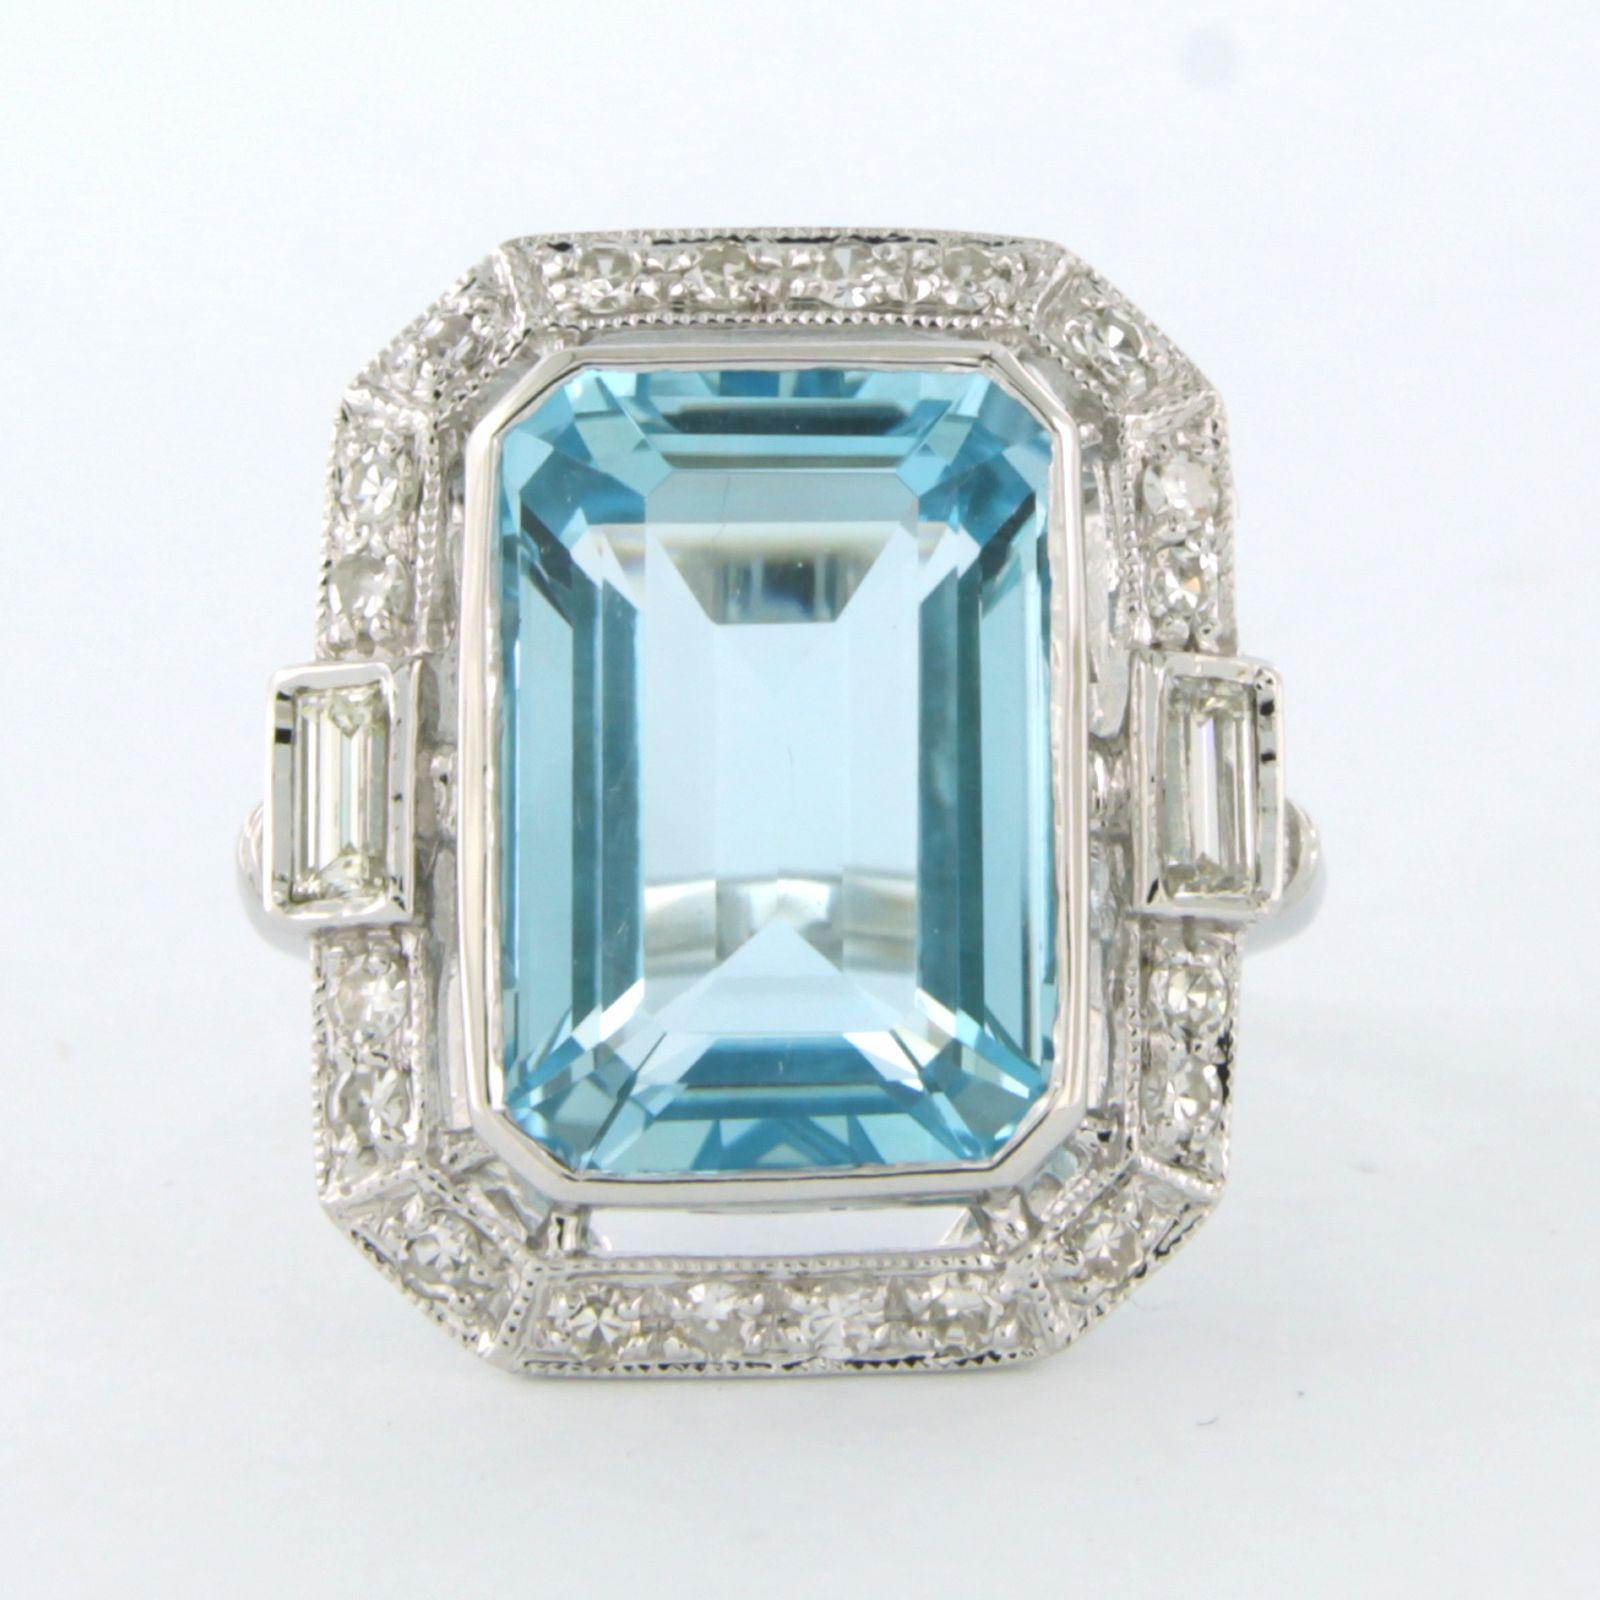 14k white gold ring set with topaz and baguette and single cut diamond. 0.86ct - F/G - VS/SI – ring size U.S. 6.75 – EU. 17.25(54)

detailed description:

The top of the ring is in an emerald shape measuring 2.1 cm by 1.5 cm wide by 7.3 mm